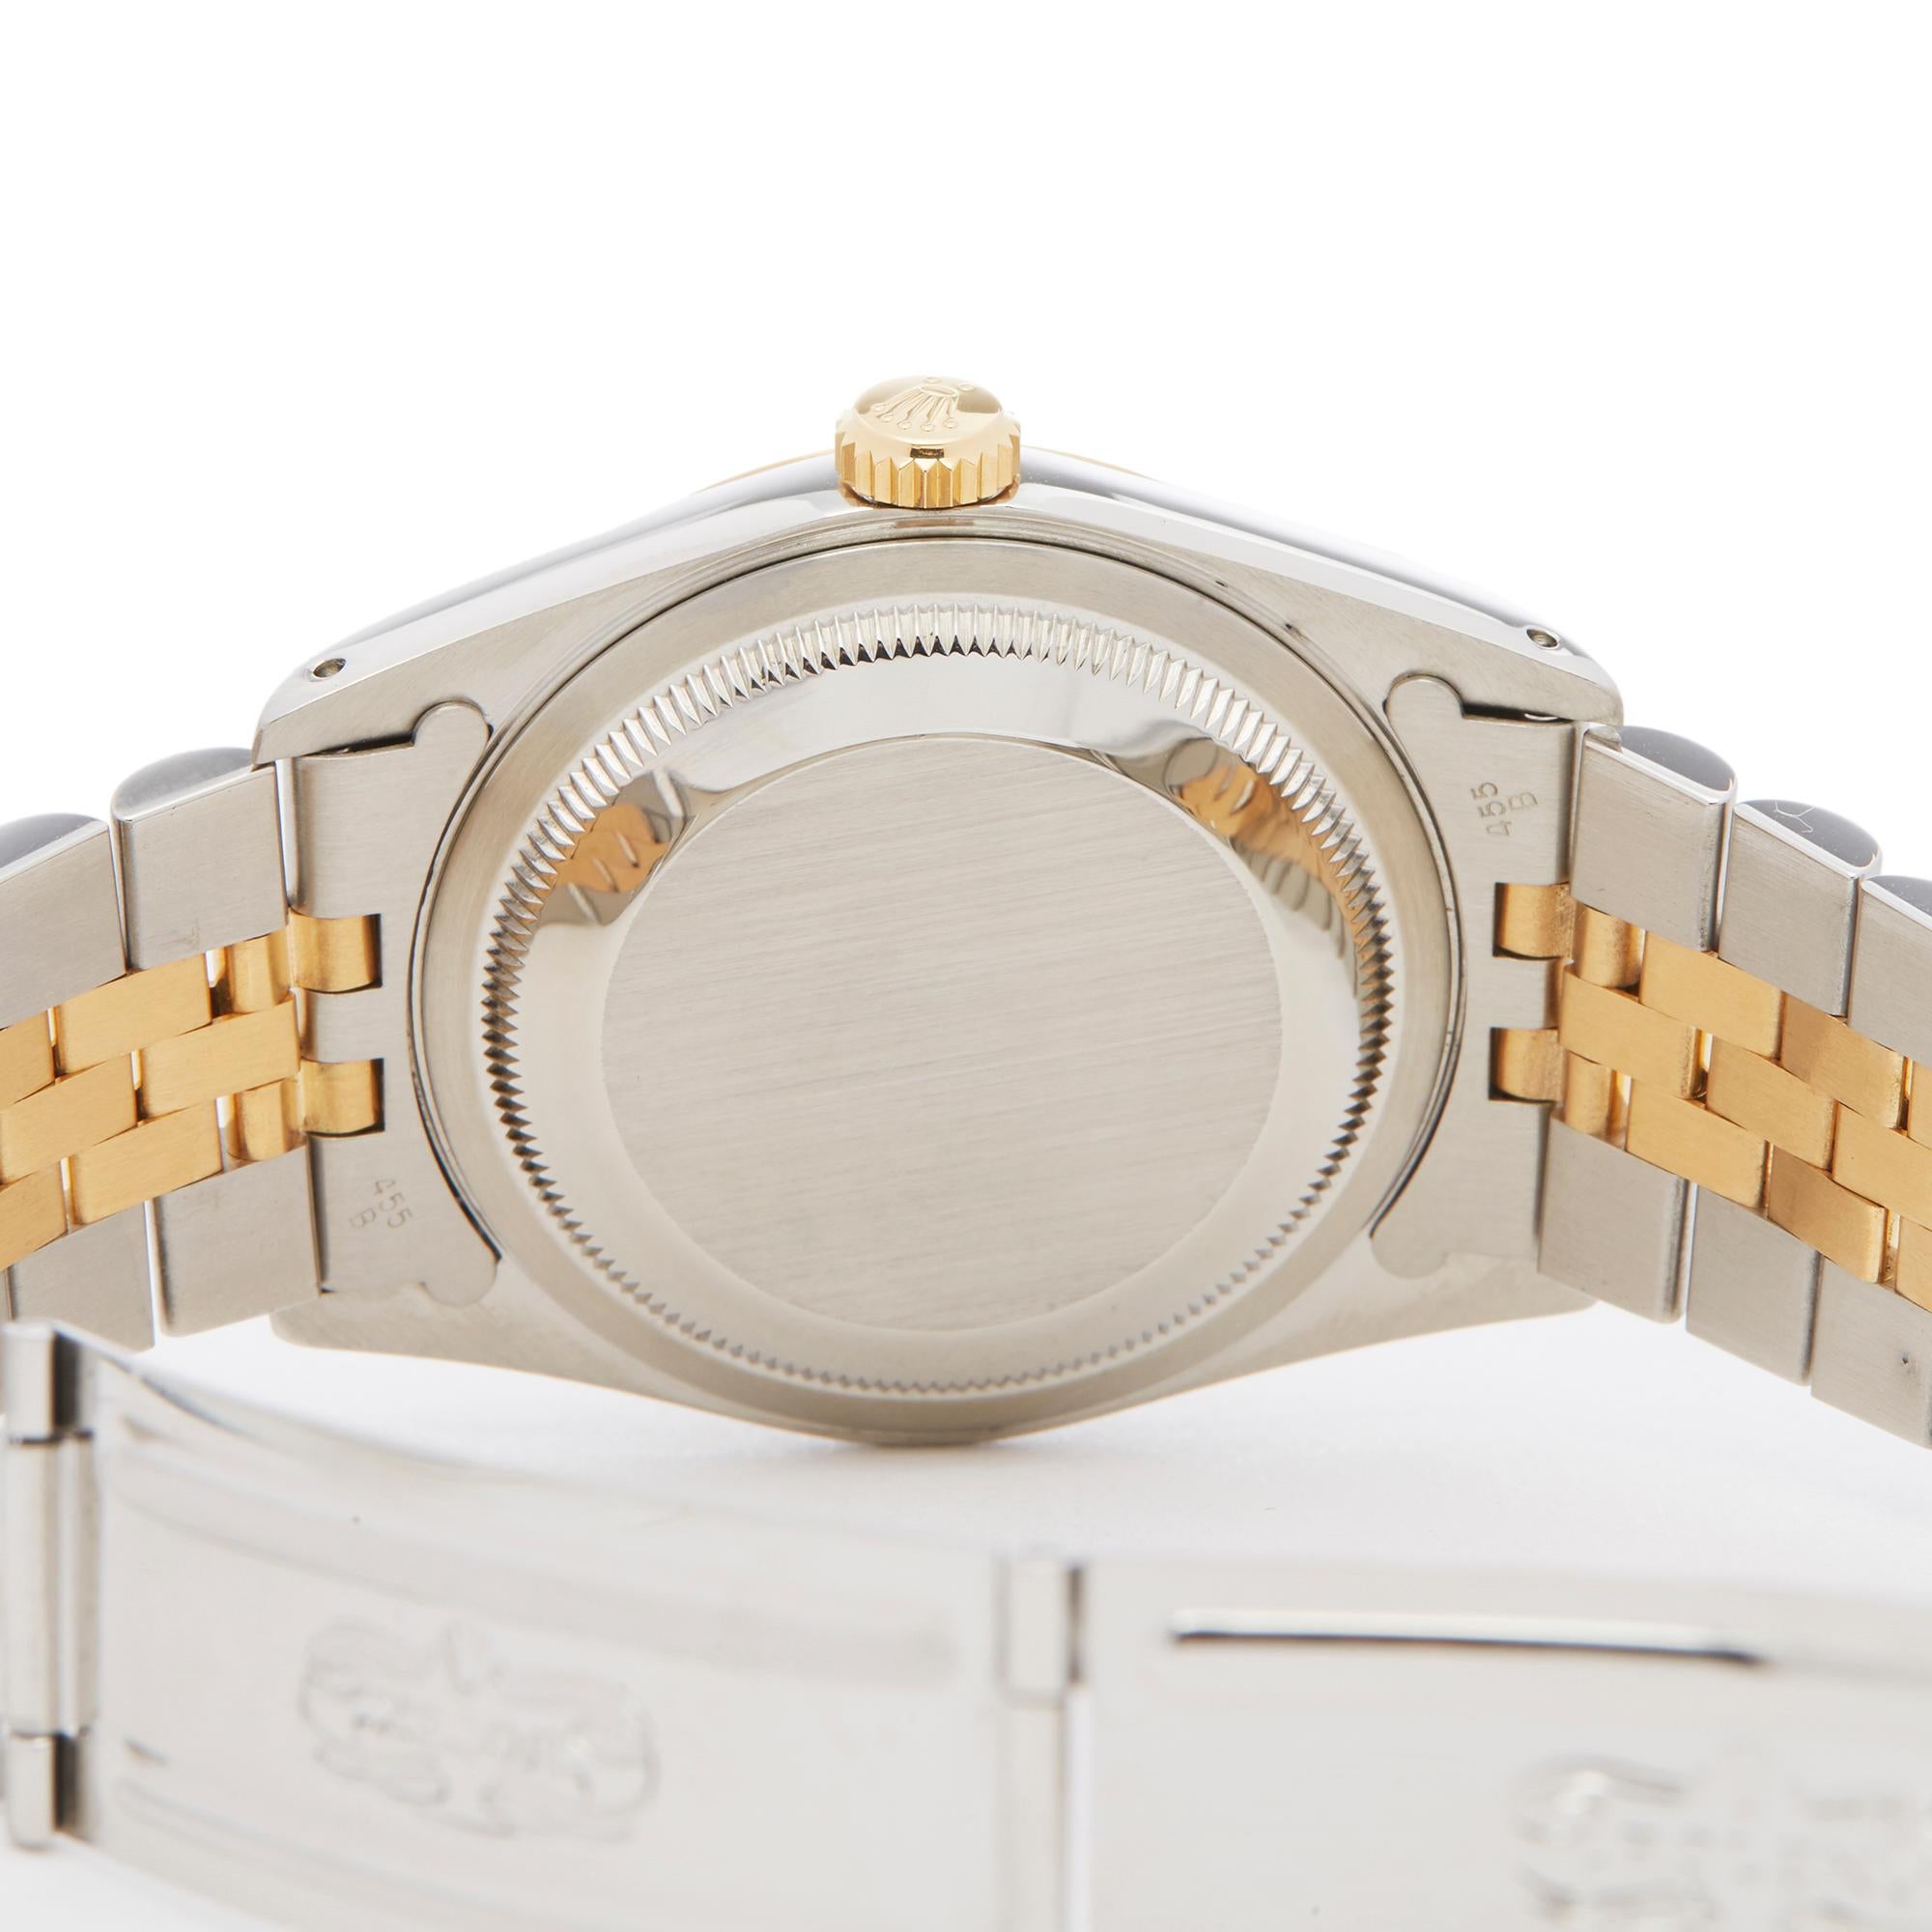 Rolex DateJust 36 Diamond Stainless Steel and Yellow Gold 16233 2